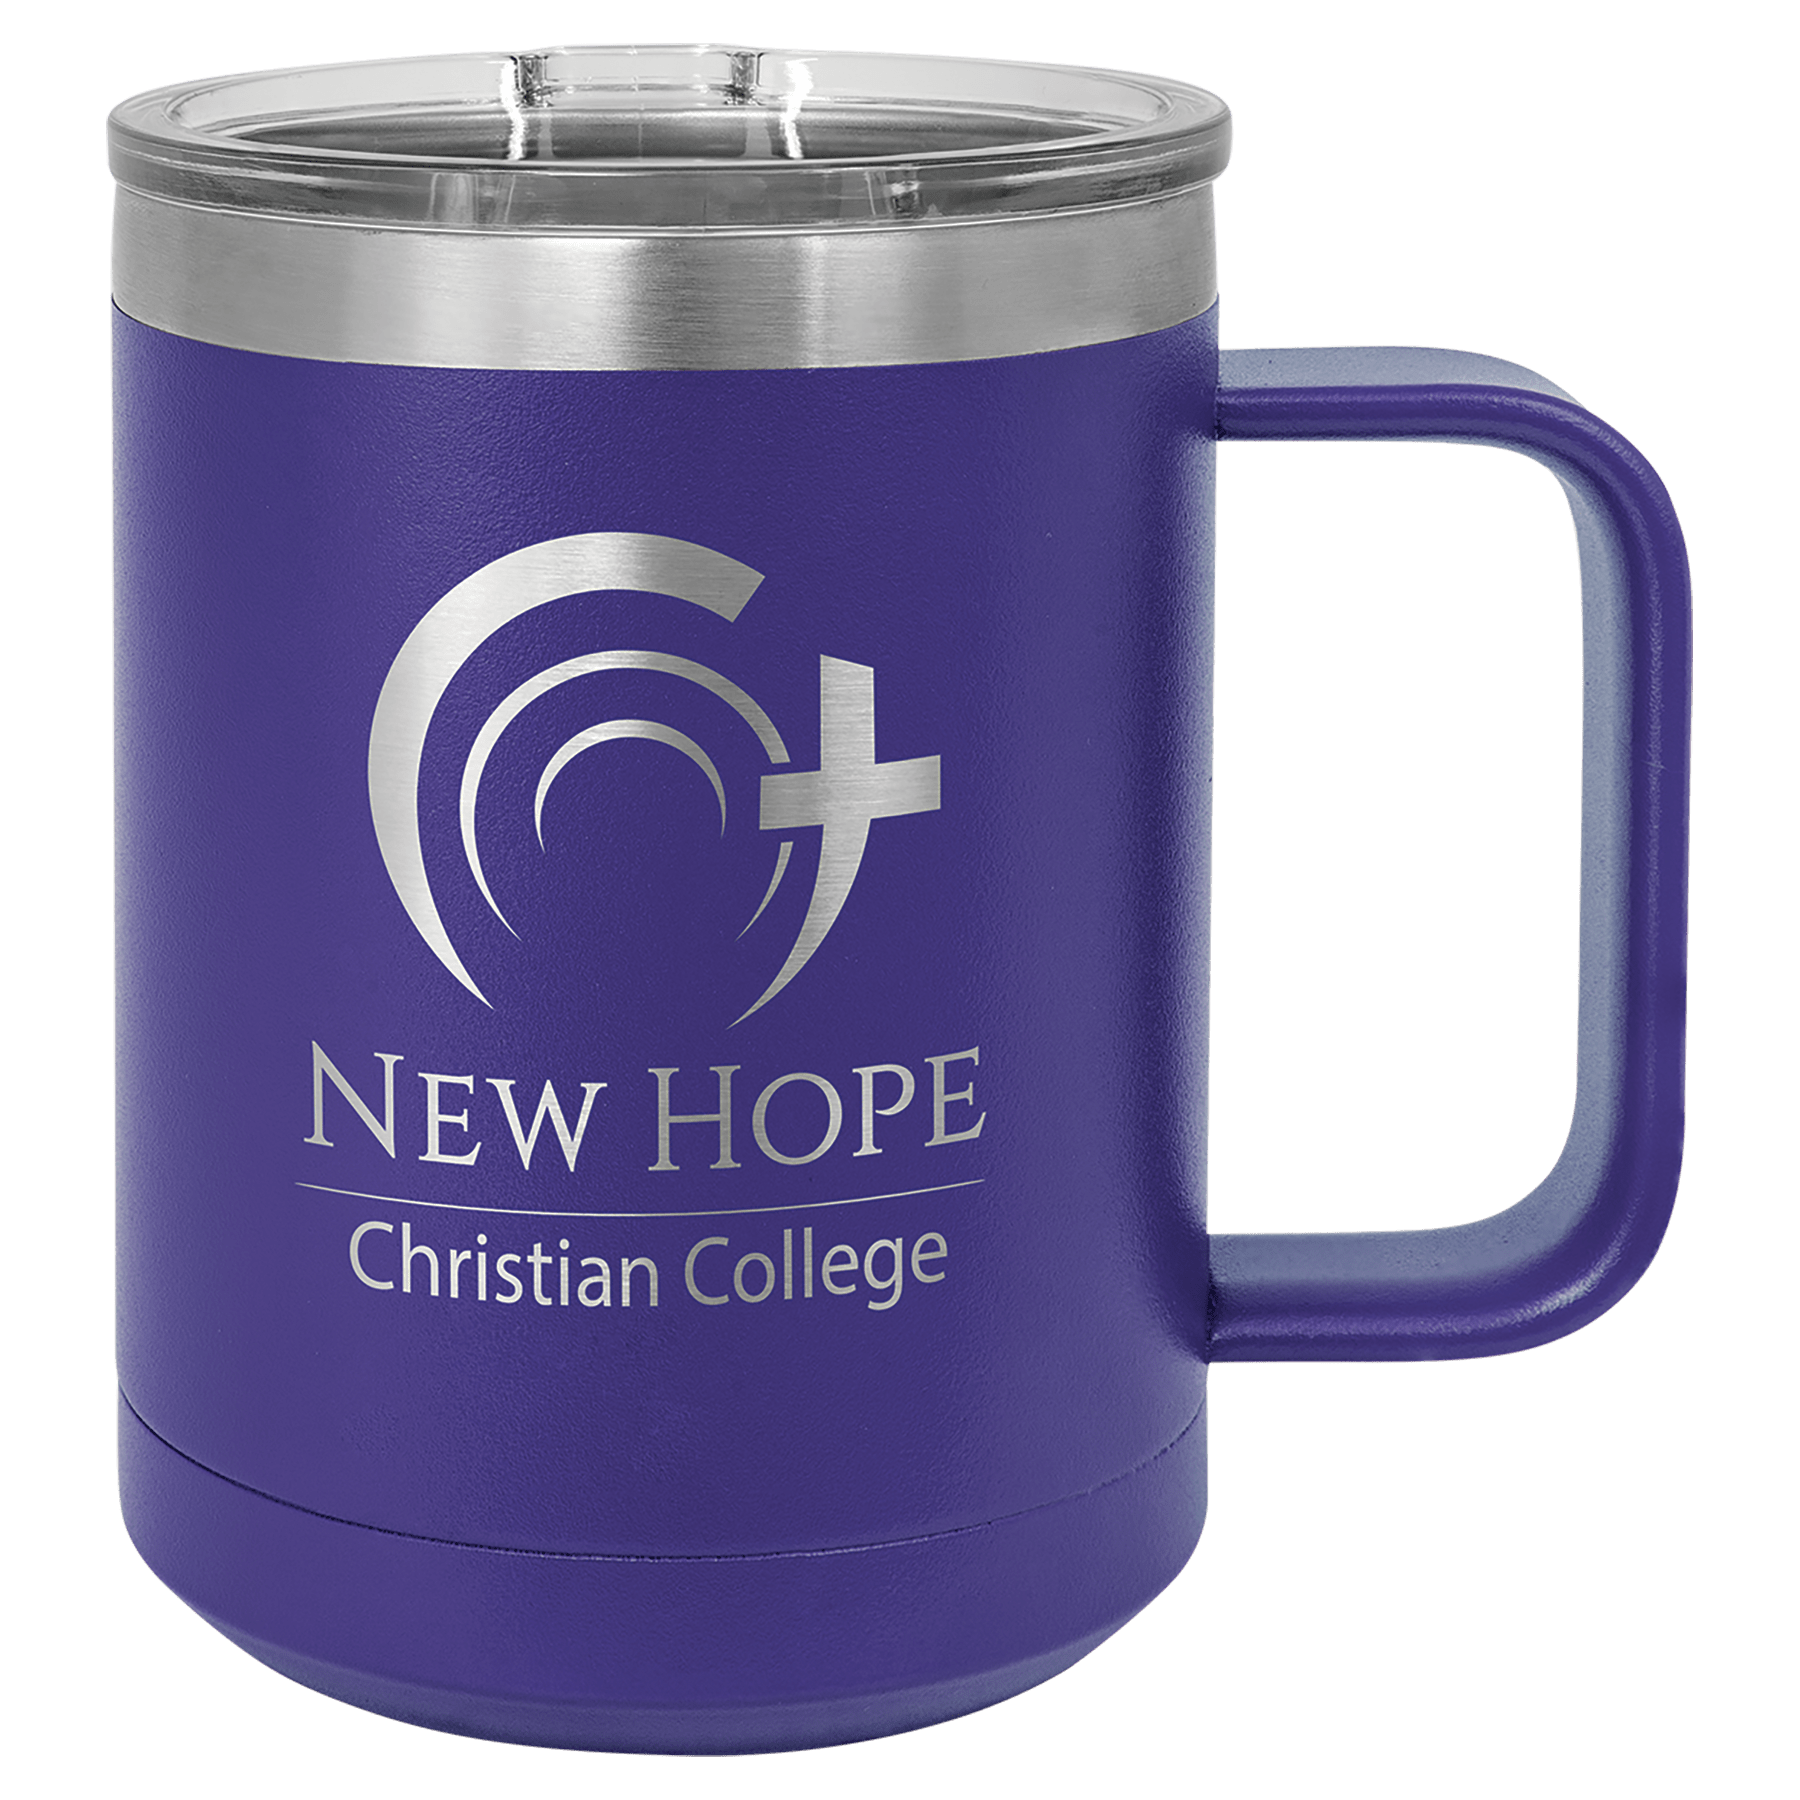 Vacuum Insulated Mug with Slider Lid in Many Colors